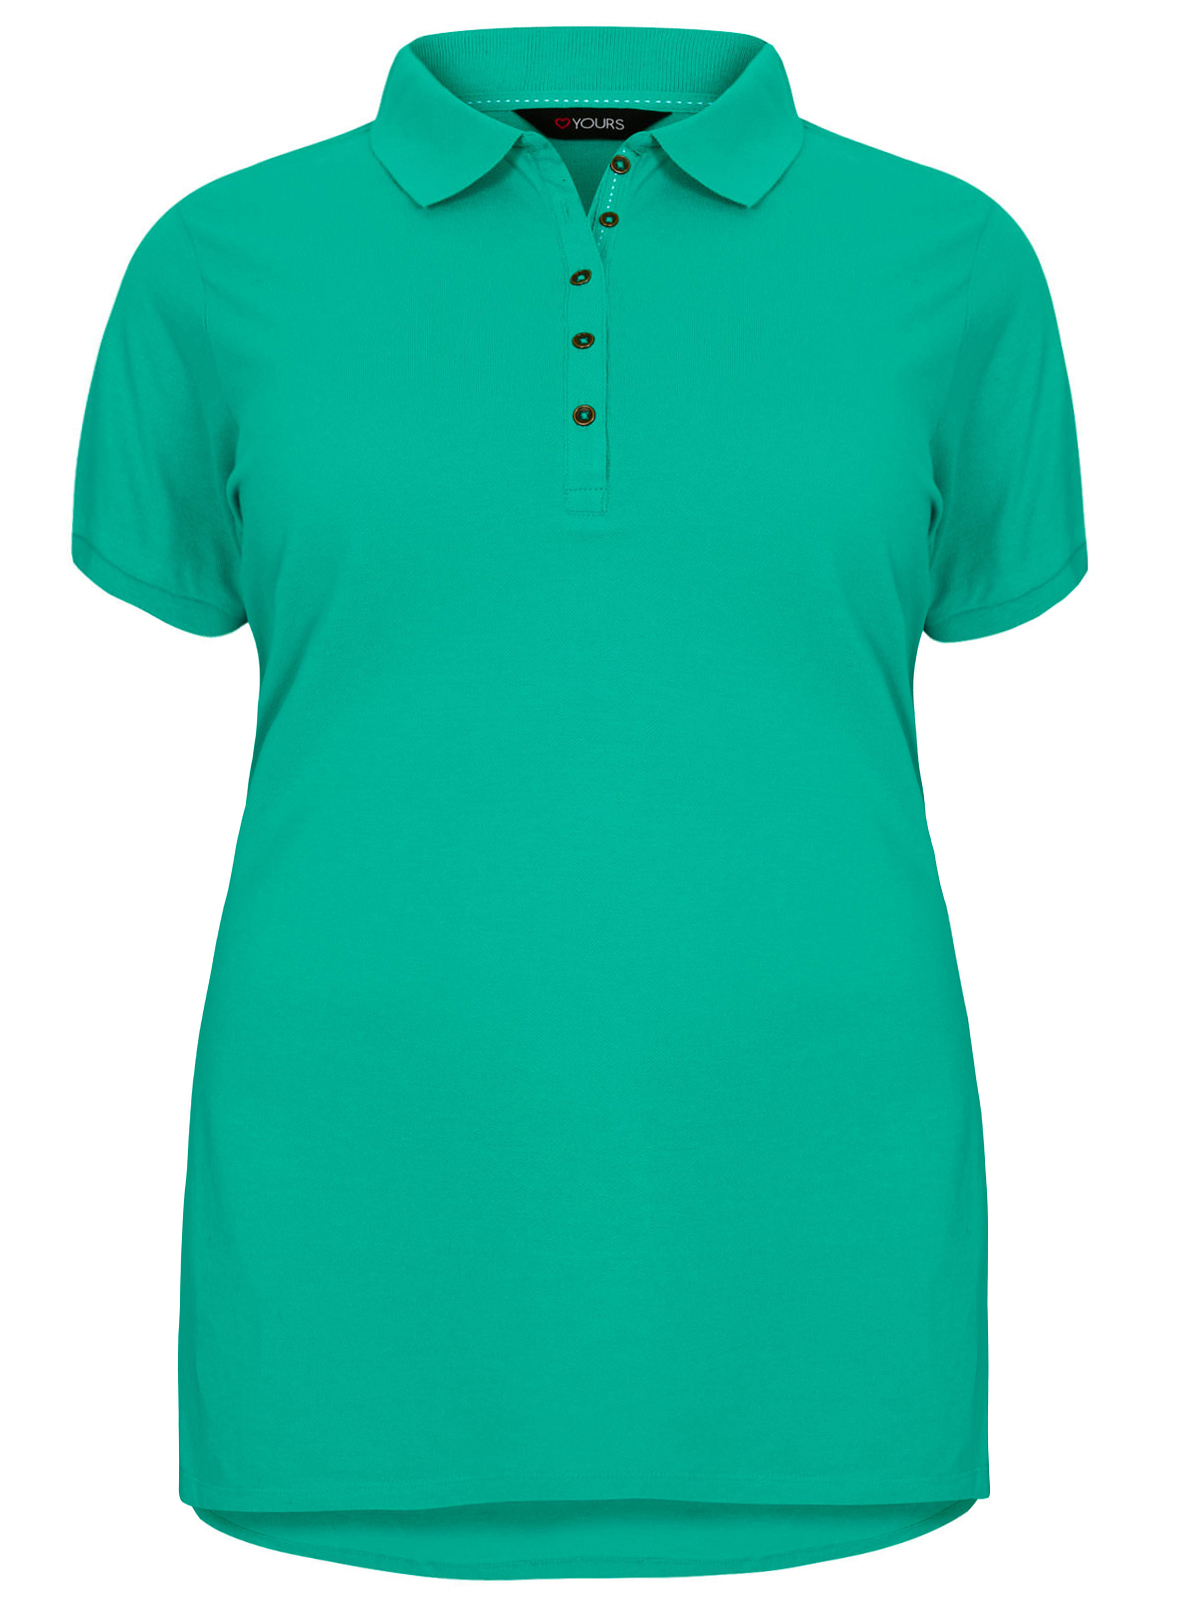 CURVE - - Y0URS JADE GREEN Short Sleeve Polo T-Shirt - Plus Size 18 to ...